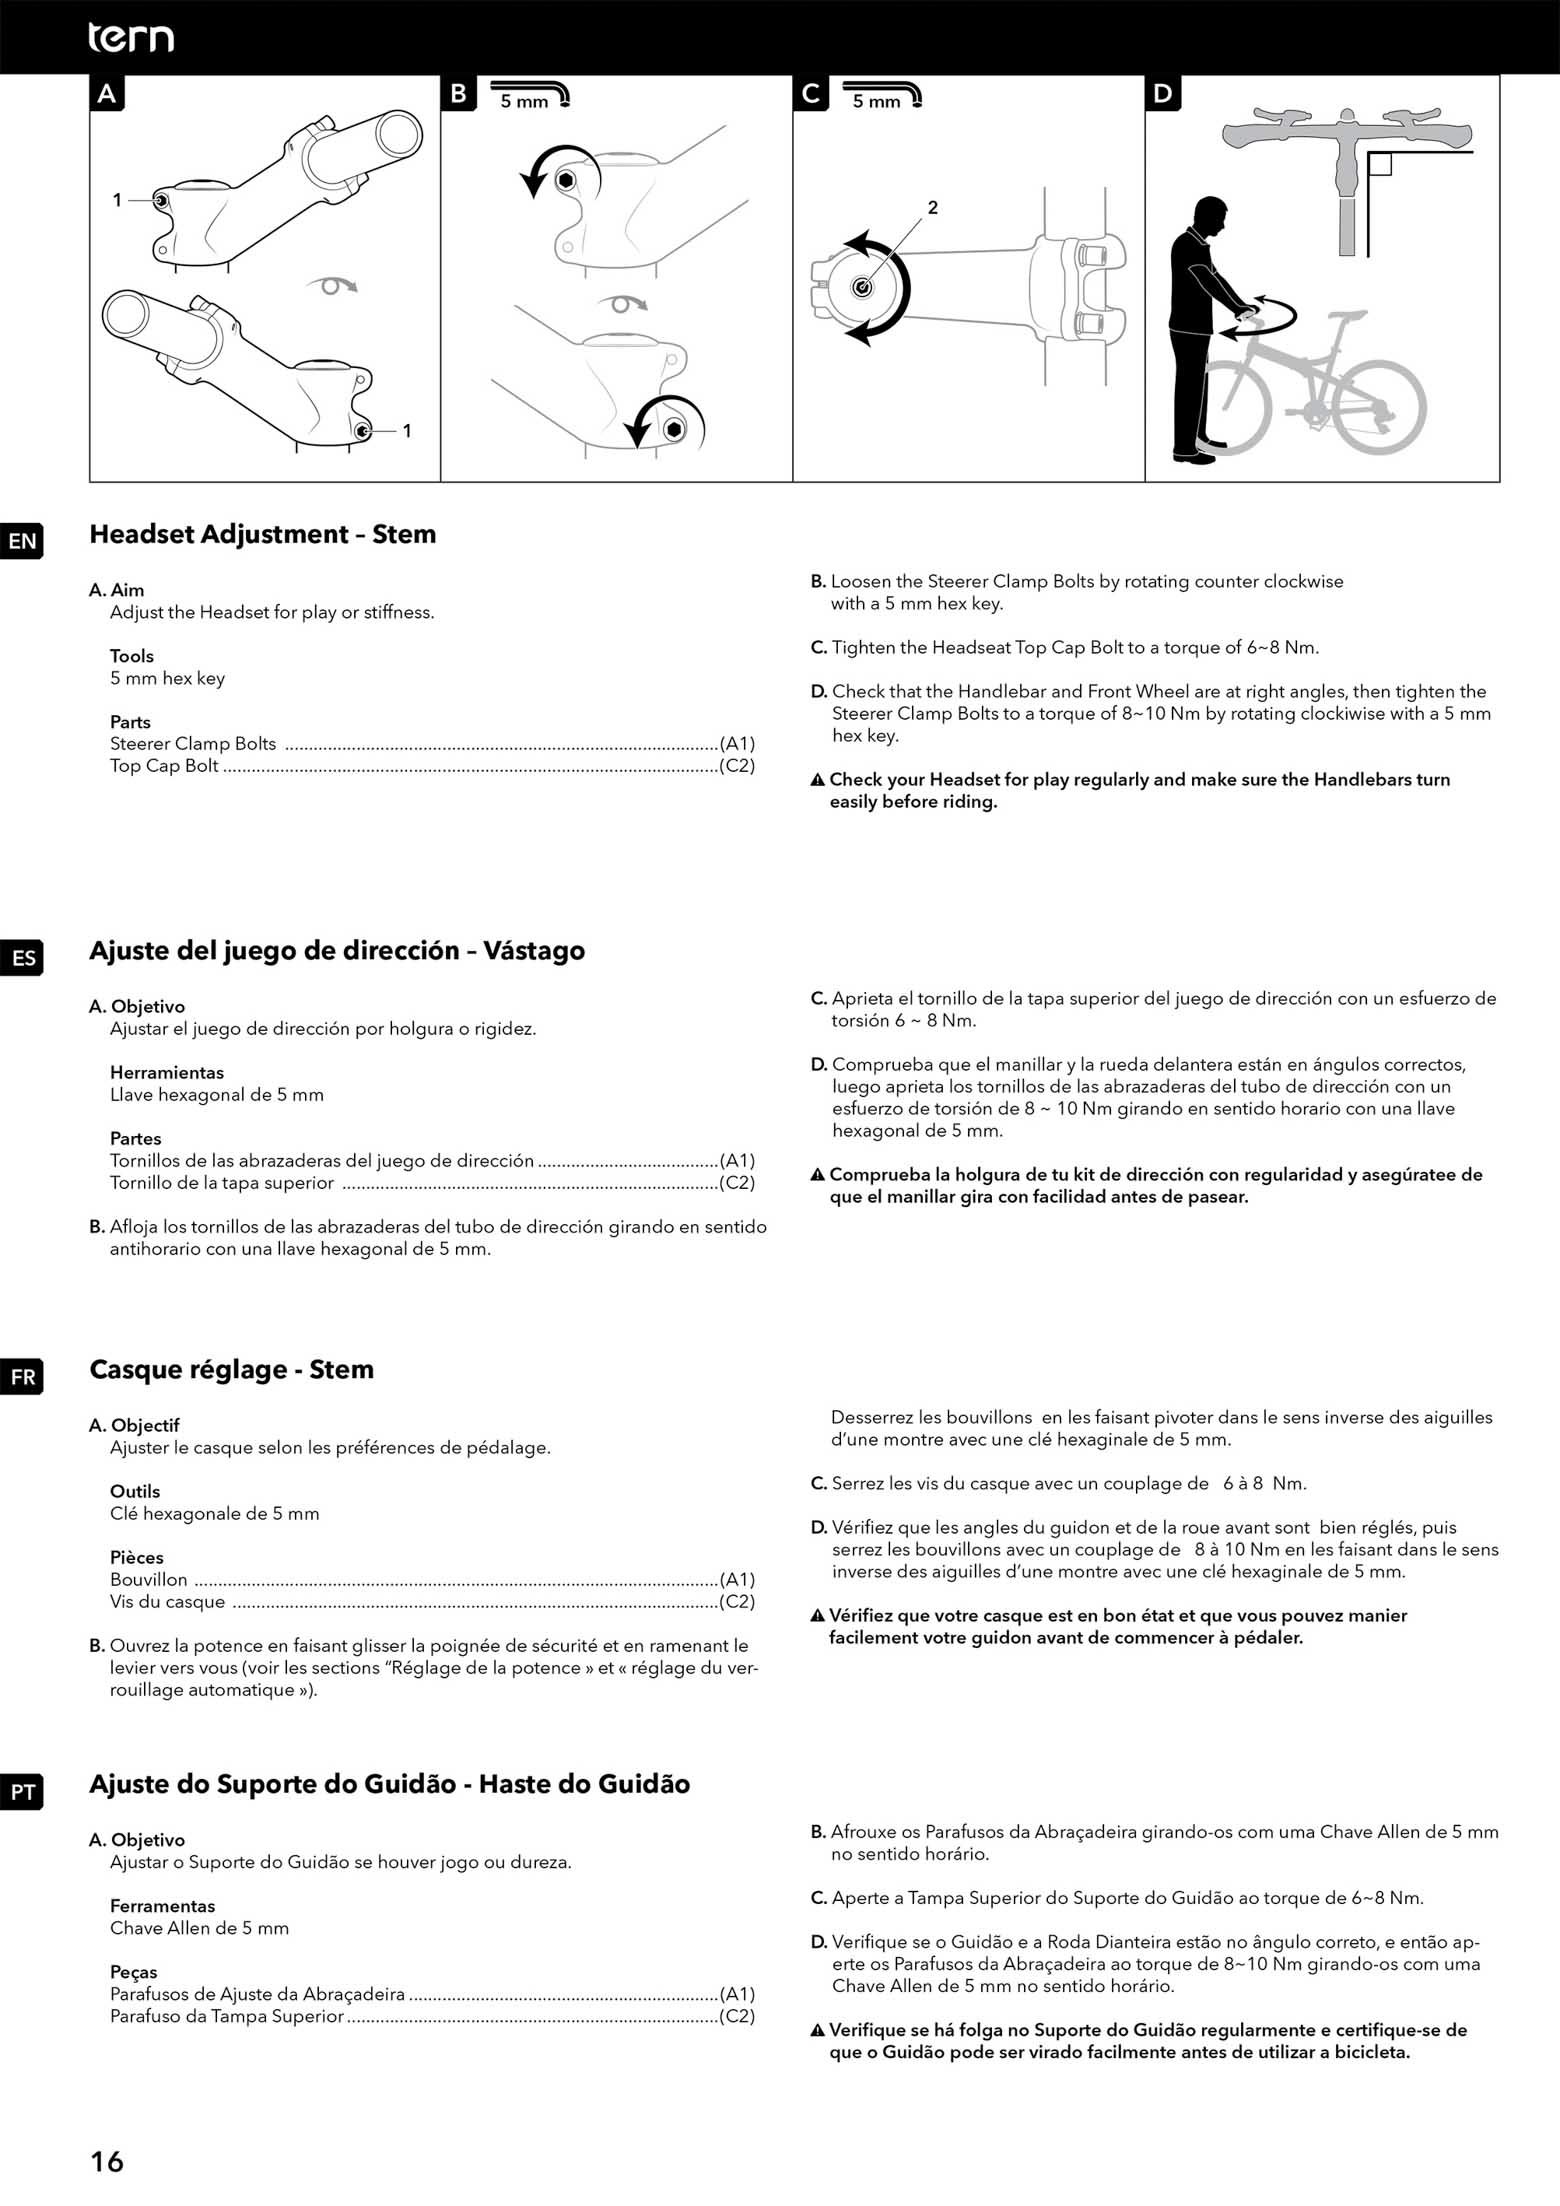 Tern - Service Instructions page 016 main image